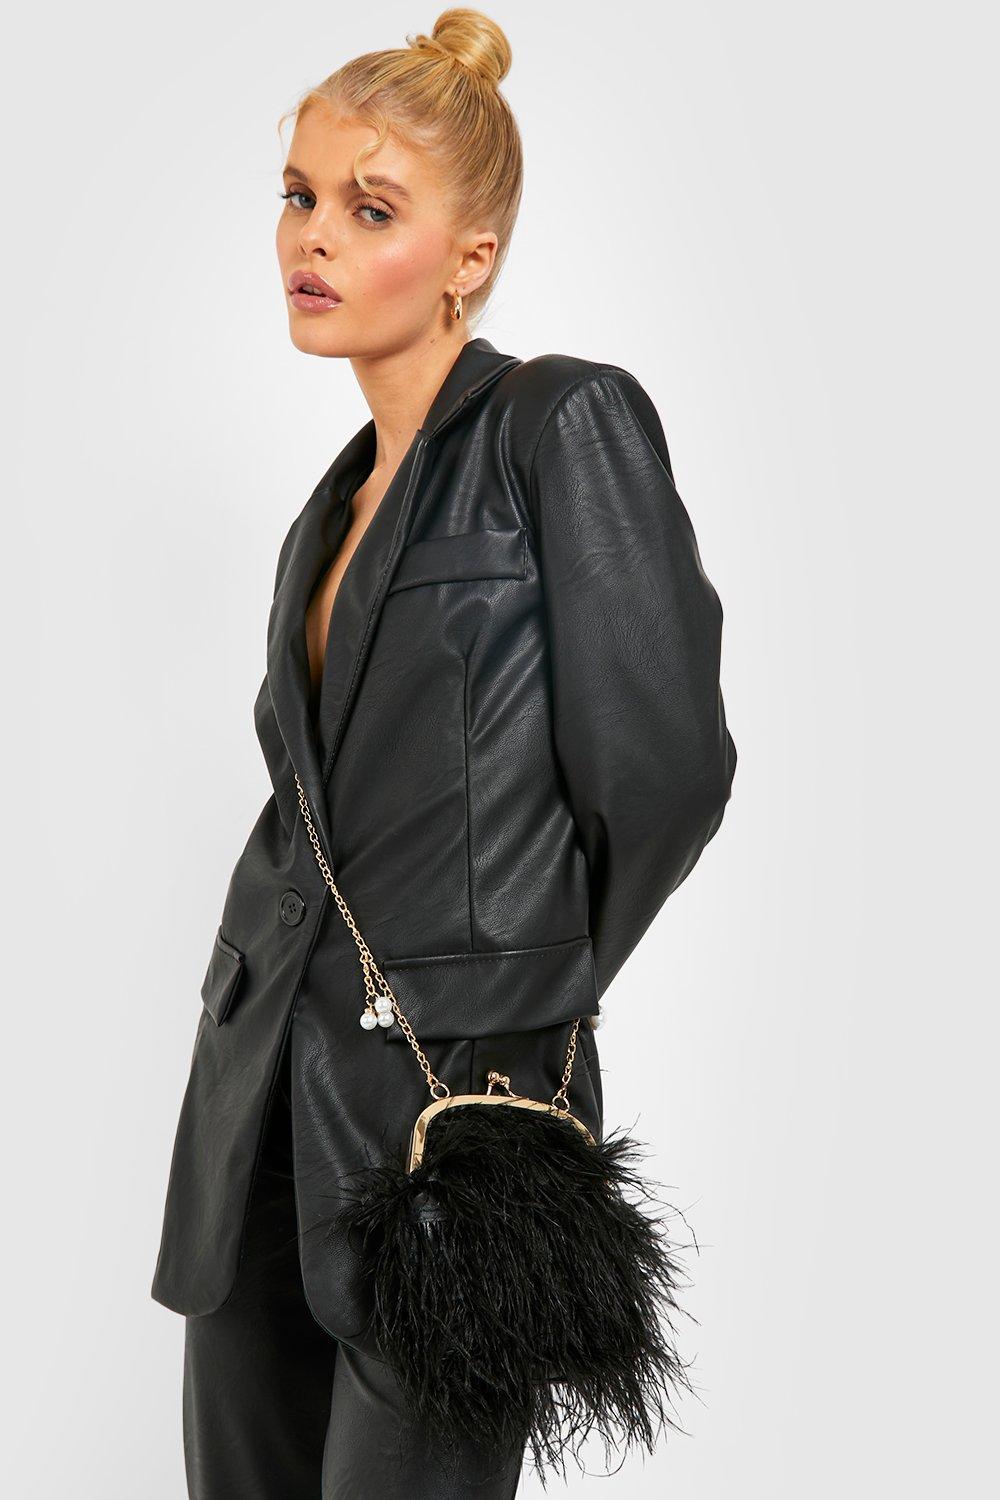 Black crossbody bag with feathers